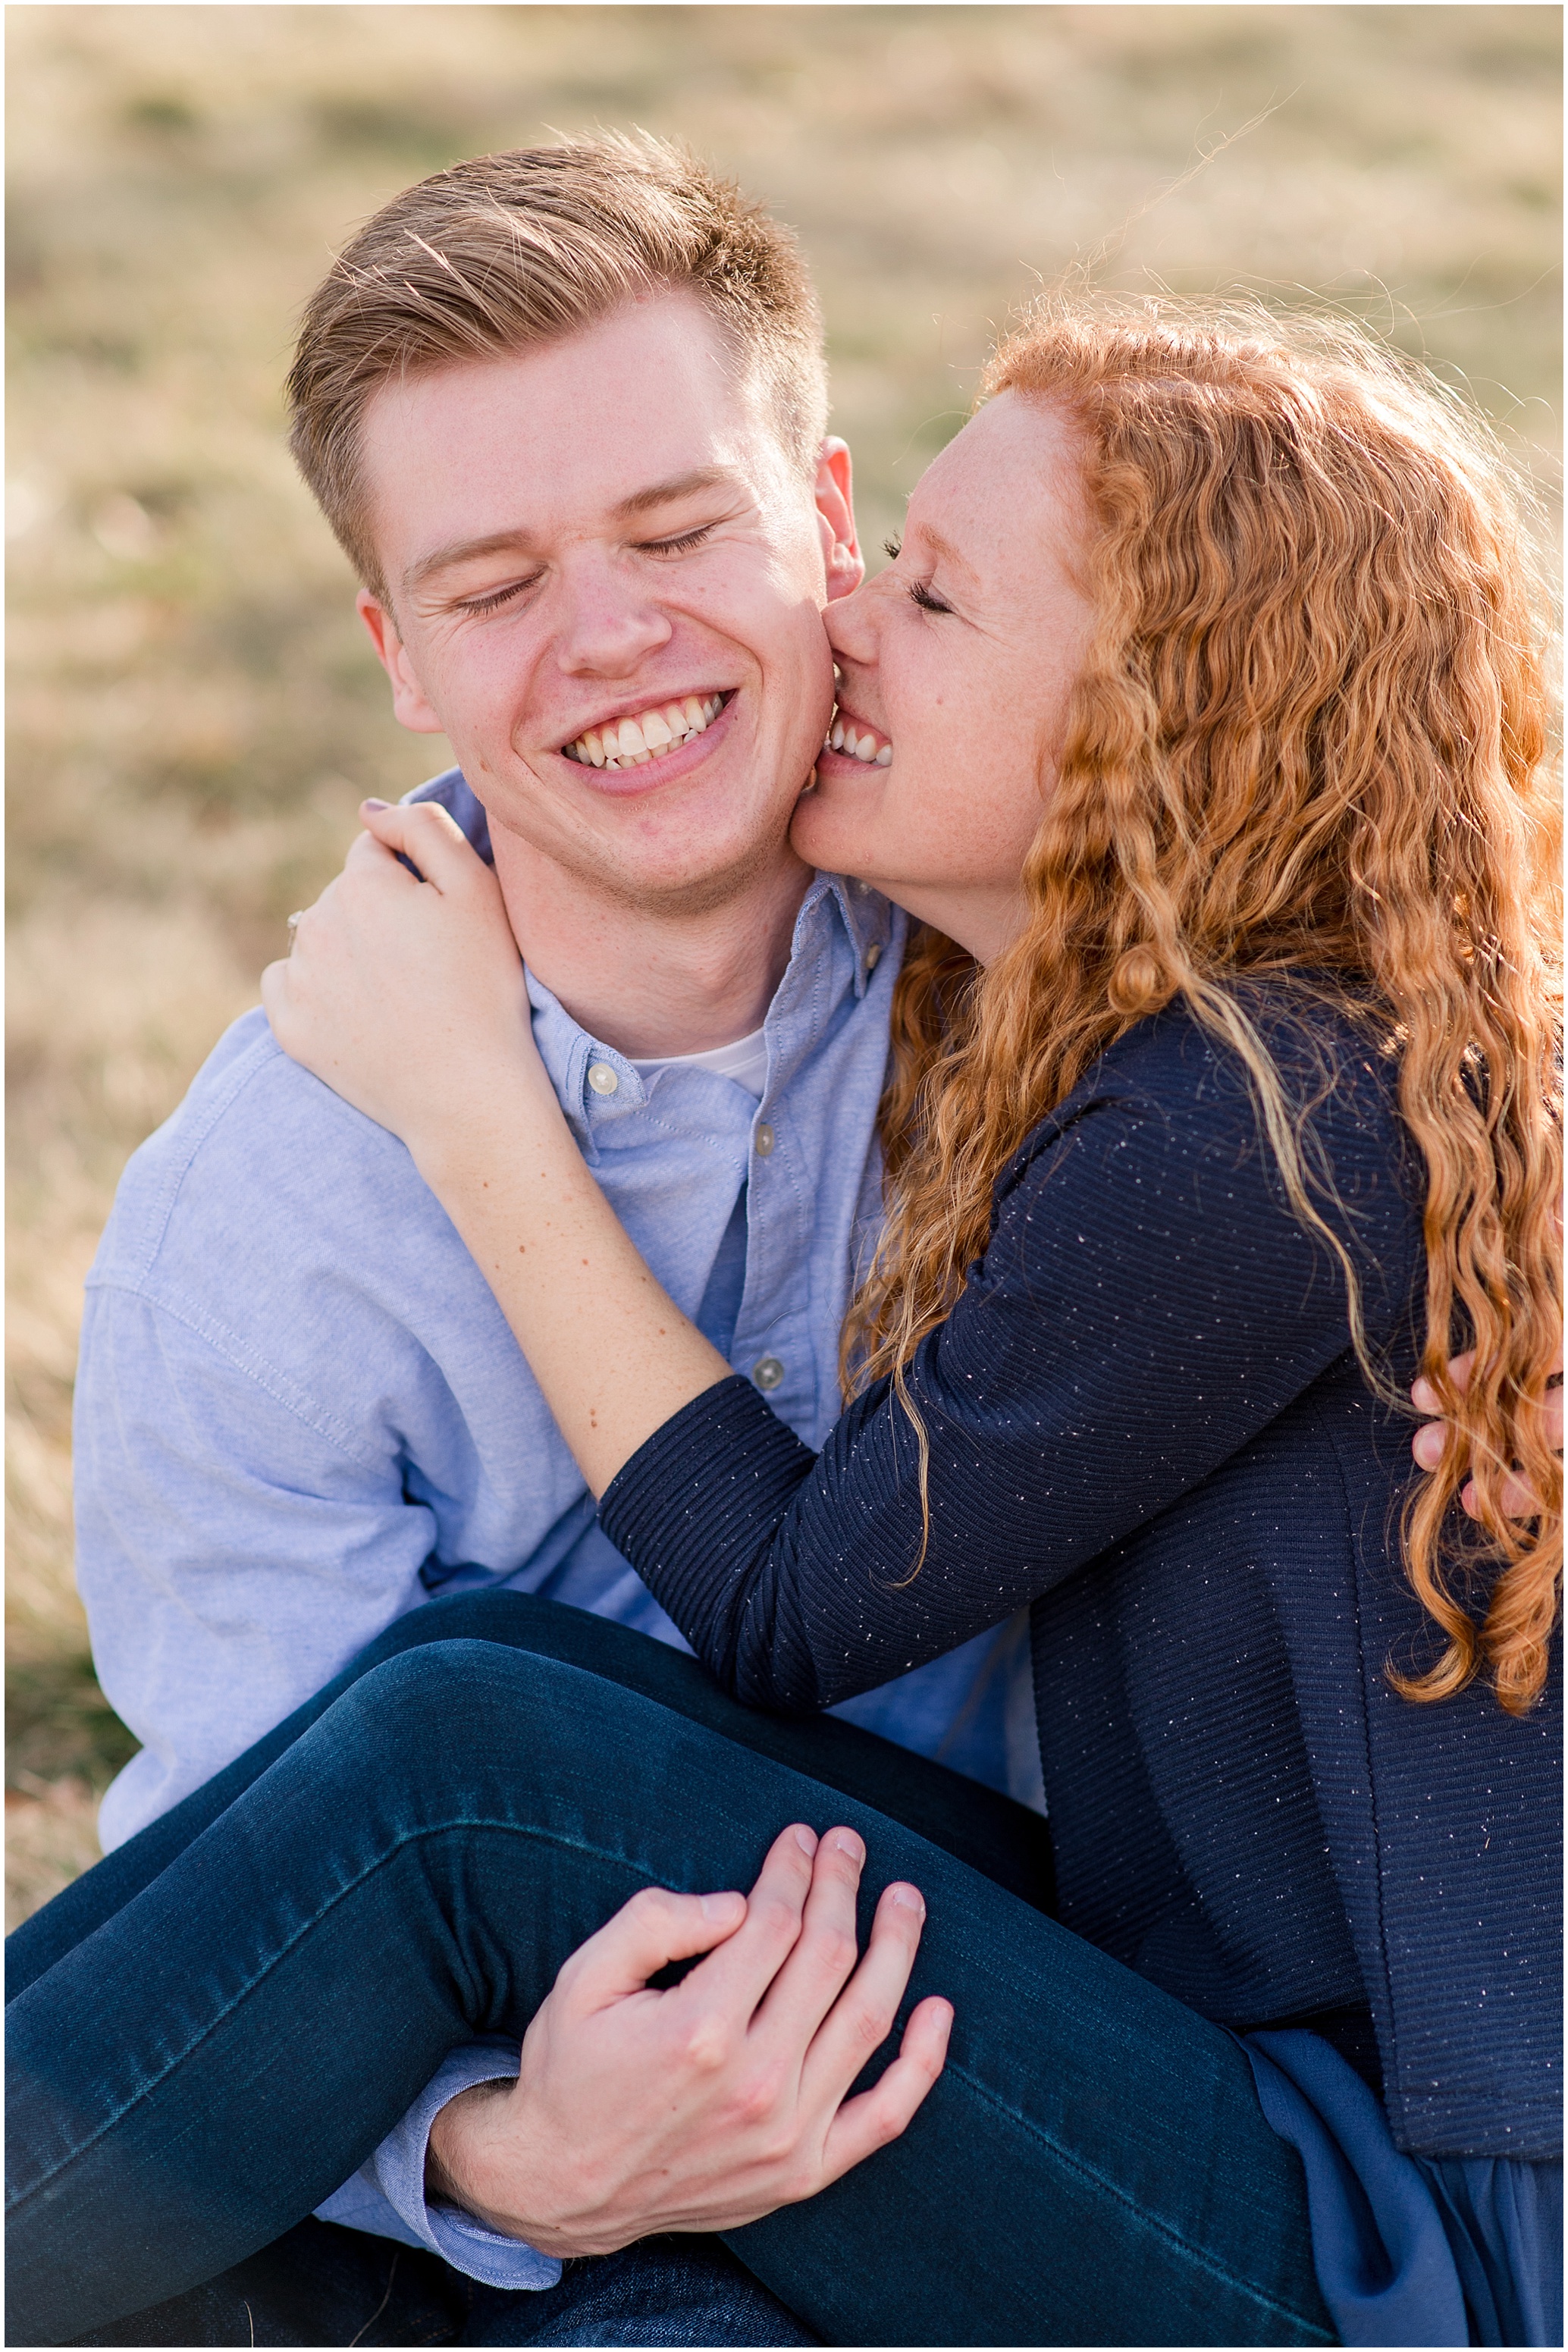 Hannah Leigh Photography State College, PA Engagement Session_3326.jpg